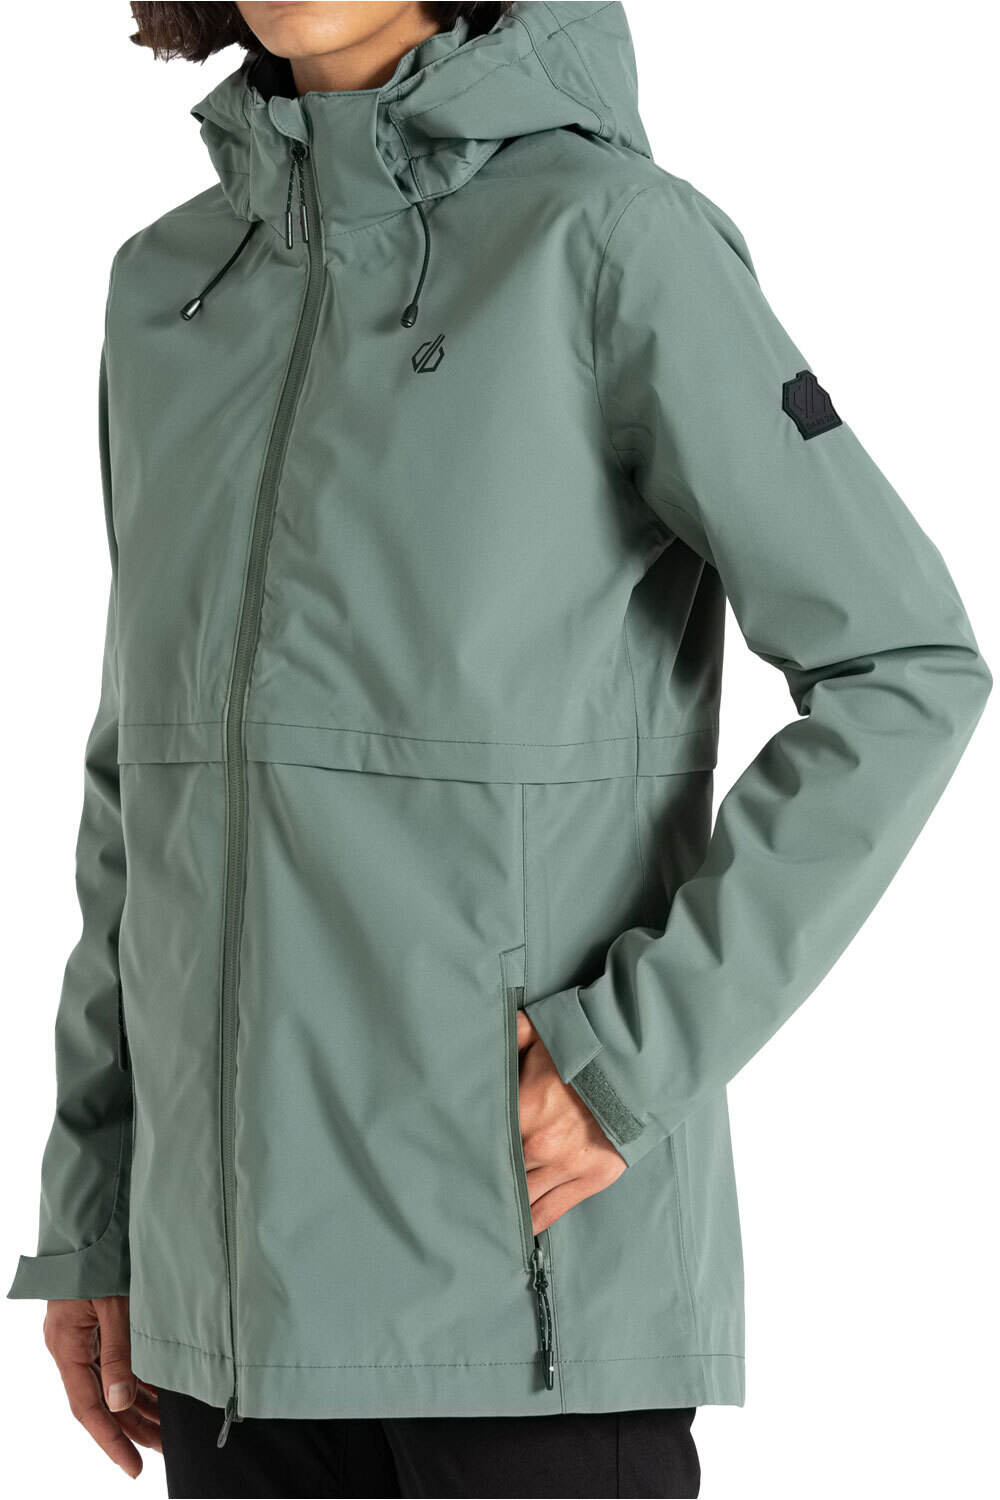 Dare2b chaqueta impermeable mujer Switch Up II Jacket vista detalle